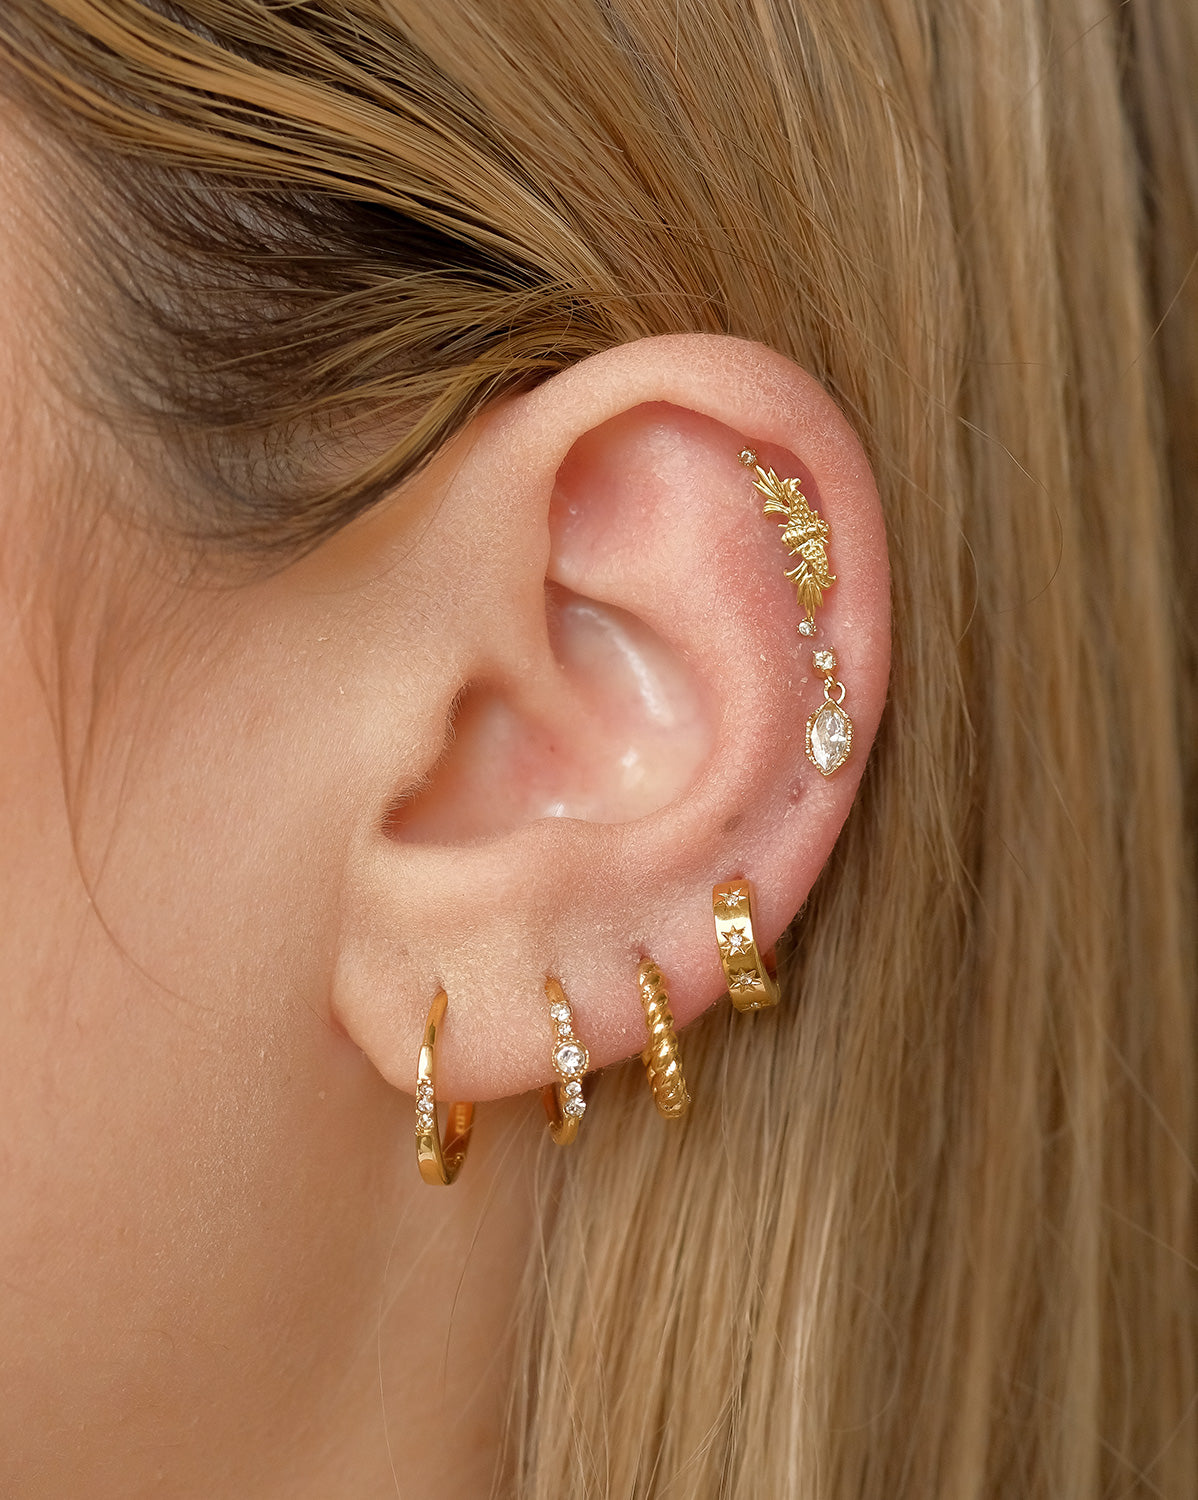 Discover 204+ cartilage piercing earrings india